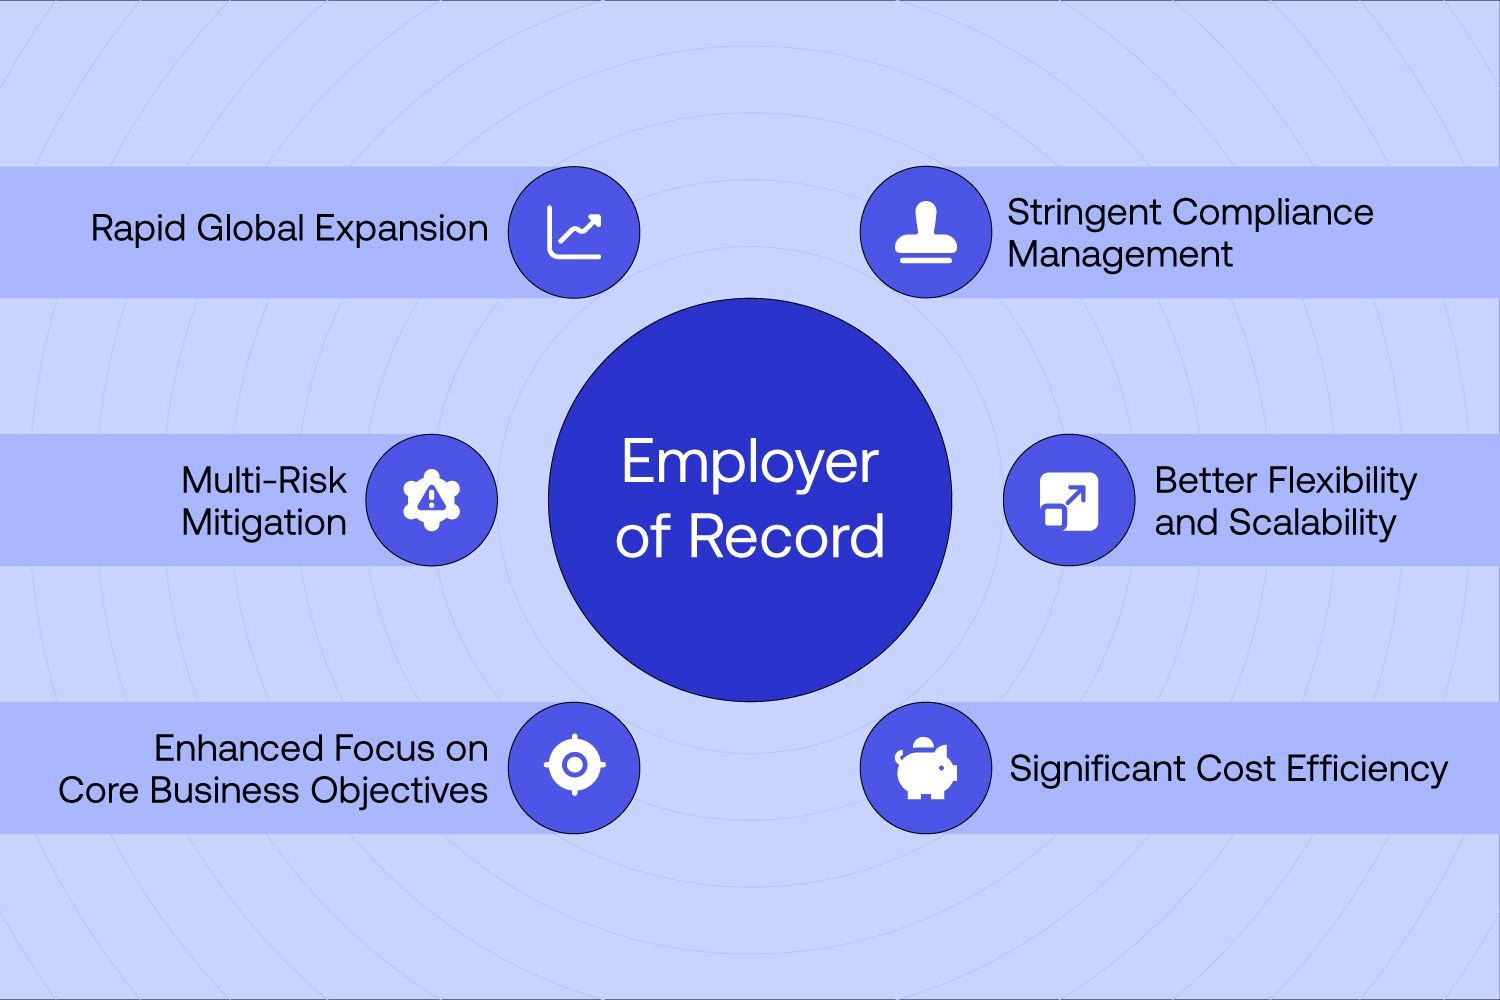 Employer of Record (EOR) is important for rapid global expansion, multi risk mitigation, enhanced focus on core business objobjectives, stringent compliance management, better fle flexibility and scalability and significant cost efficiency             